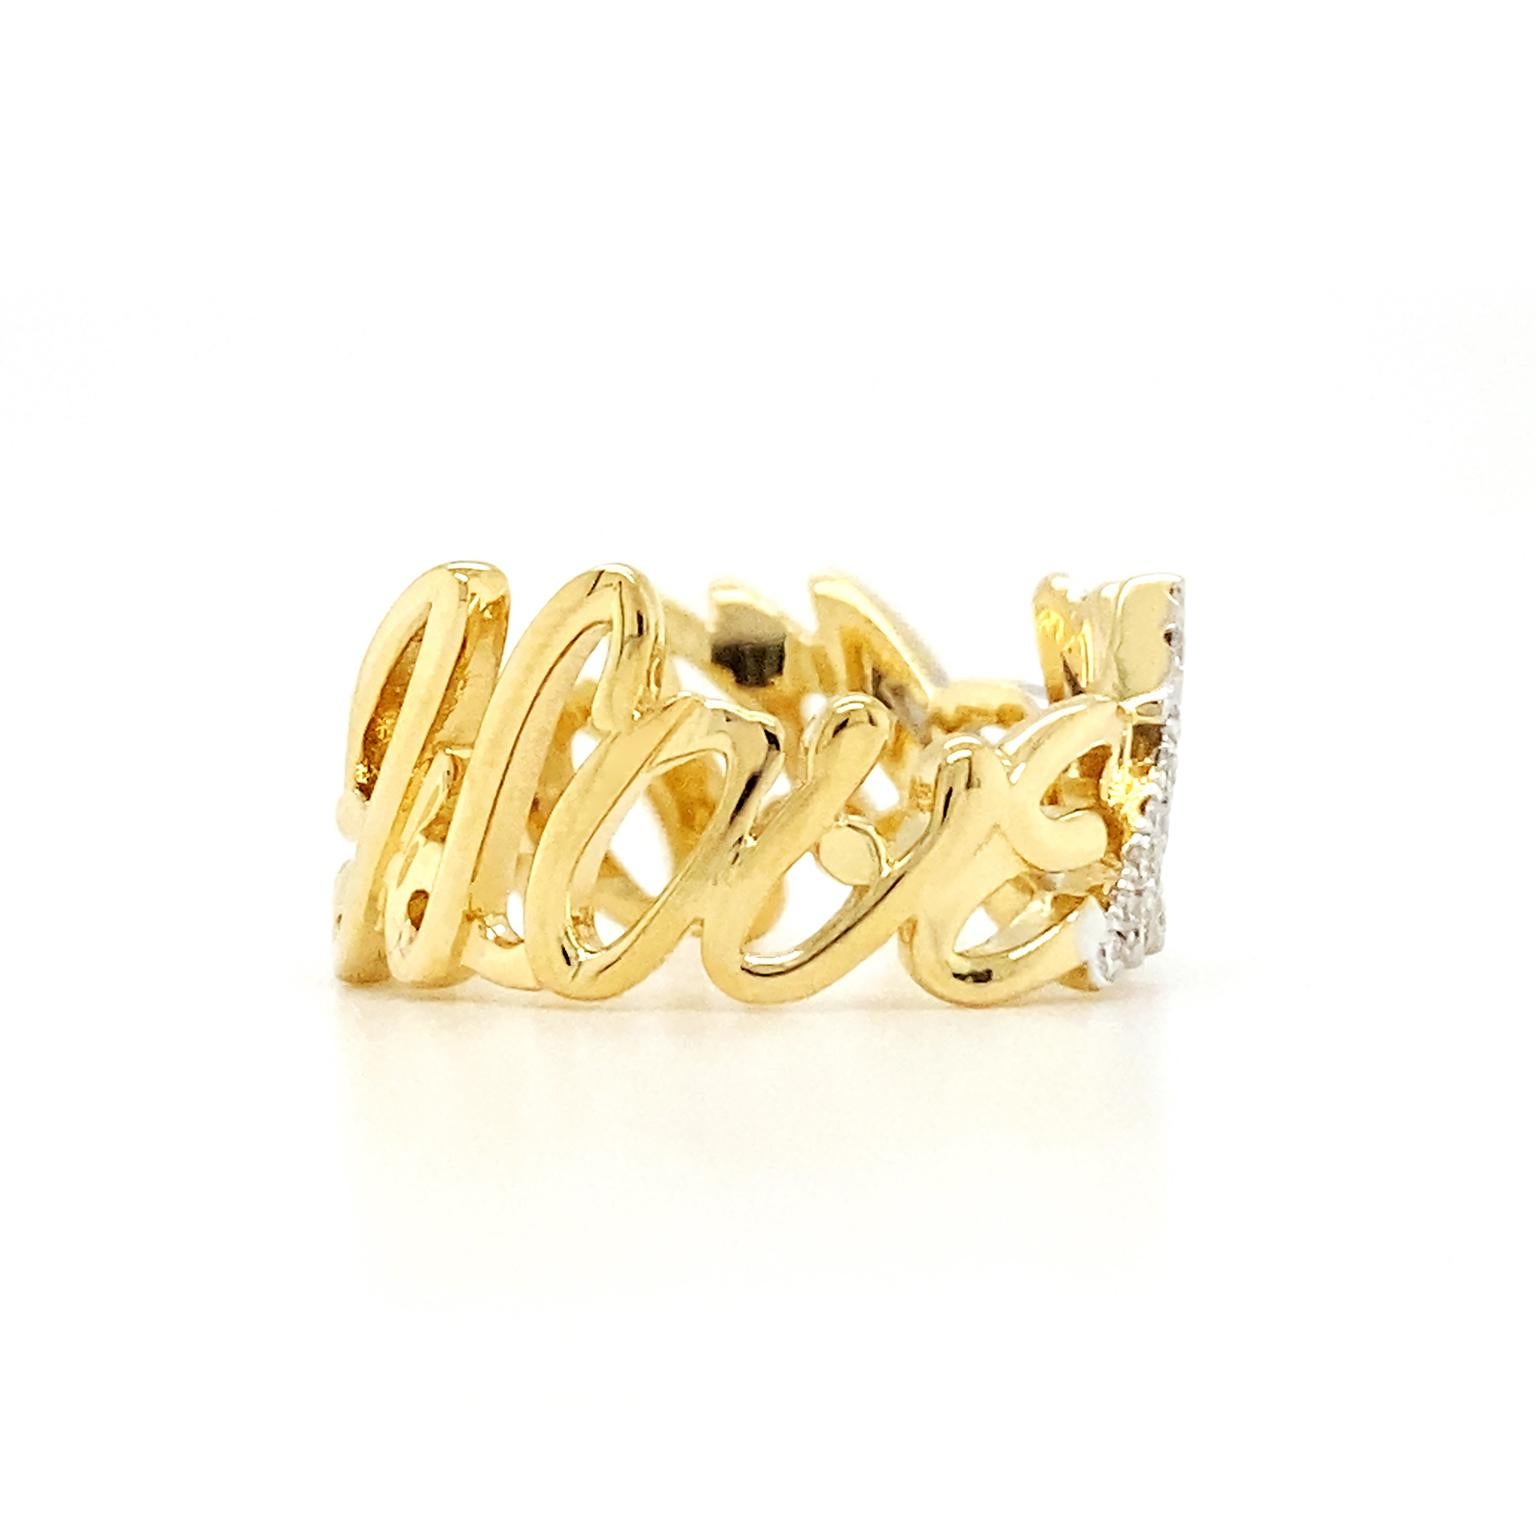 Valentin Magro I Love Me More Diamond Ring - Block is filled with affirming symbolism. The body is 18k yellow gold, fashioned into the 9.75mm high words 'I love me more.' The band creates an endless loop, repeating the message over and over. 'Me' is